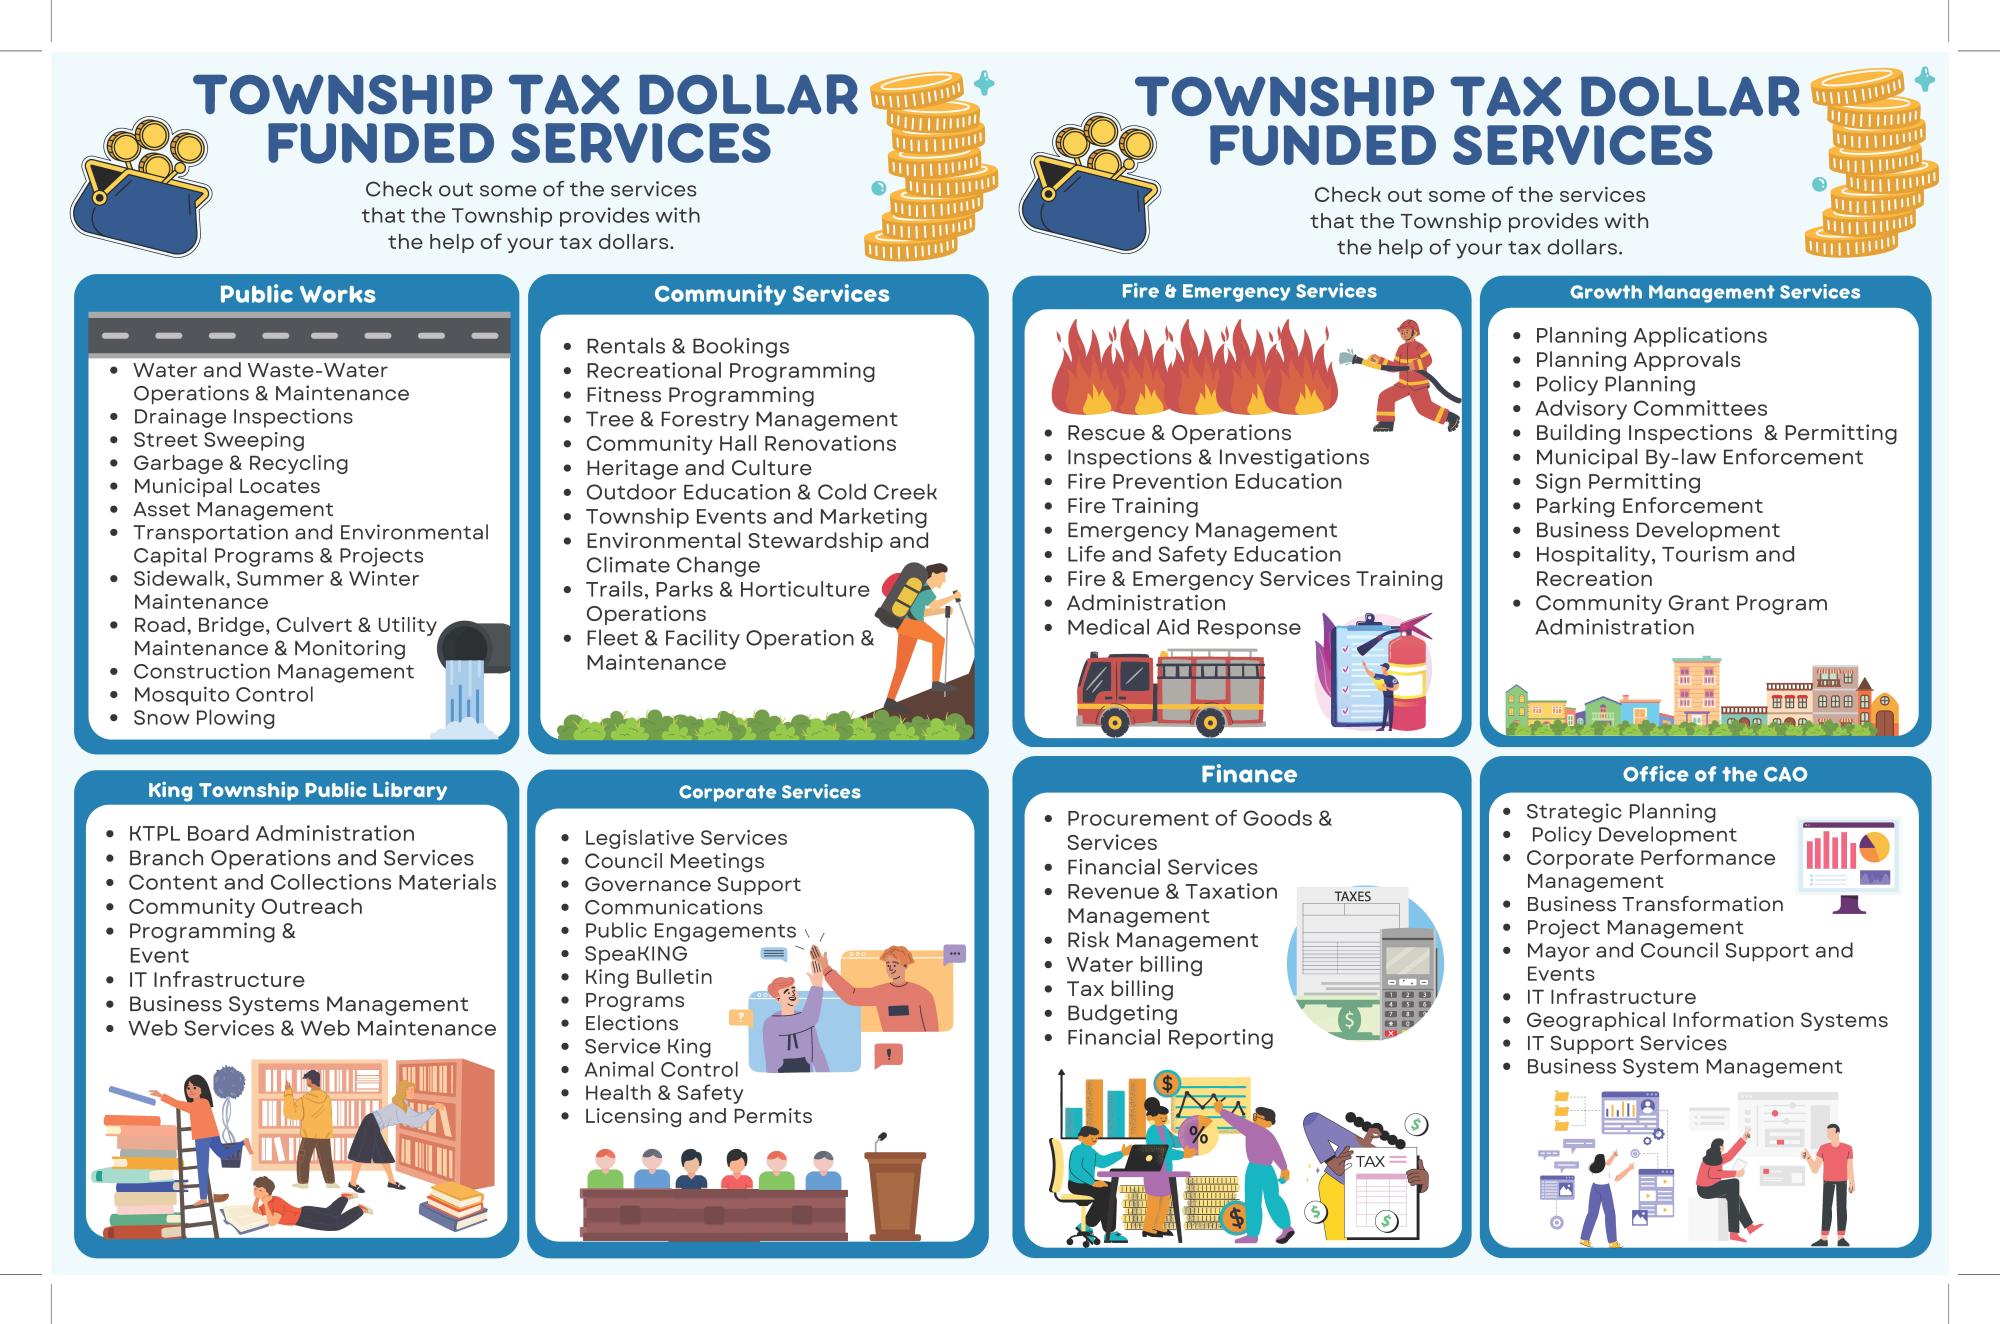 Township Tax Dollar Funded Services